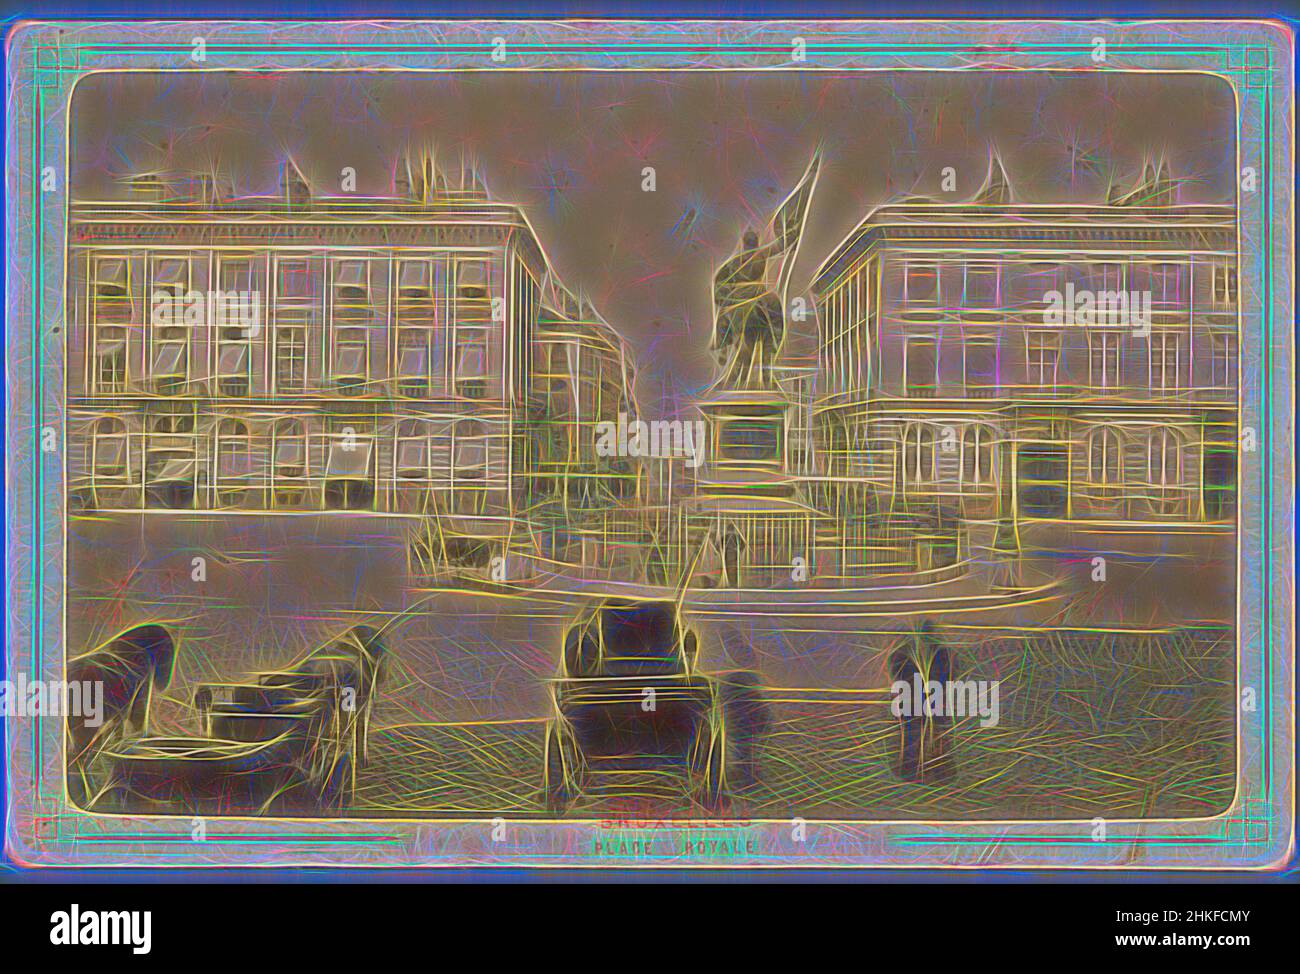 Inspired by Place Royale in Brussels, Bruxelles, Étienne Neurdein, Koningsplein, 1850 - 1900, albumen print, height 108 mm × width 164 mm, Reimagined by Artotop. Classic art reinvented with a modern twist. Design of warm cheerful glowing of brightness and light ray radiance. Photography inspired by surrealism and futurism, embracing dynamic energy of modern technology, movement, speed and revolutionize culture Stock Photo